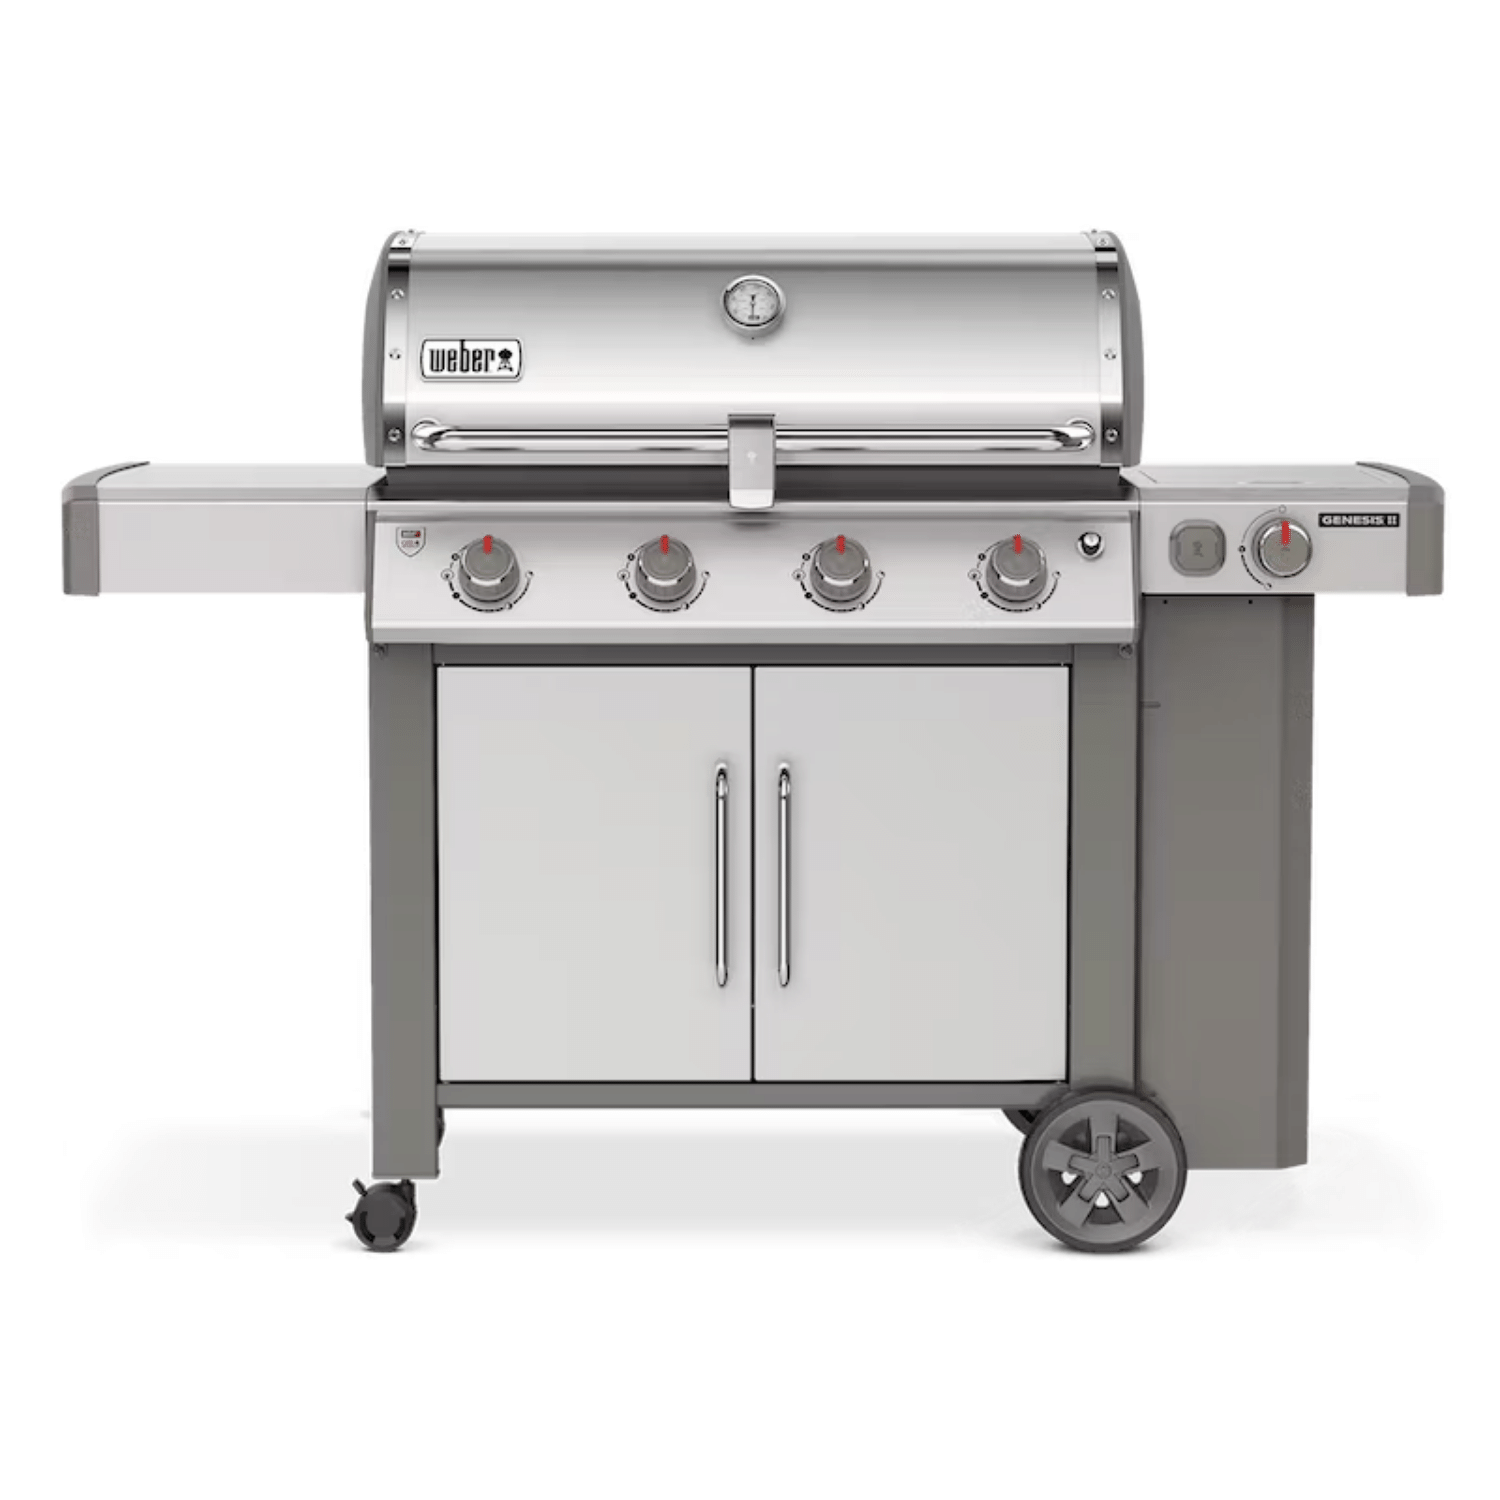 Weber Genesis II E-455 premium grill for outdoor barbecuing available at MeatKing.hk2